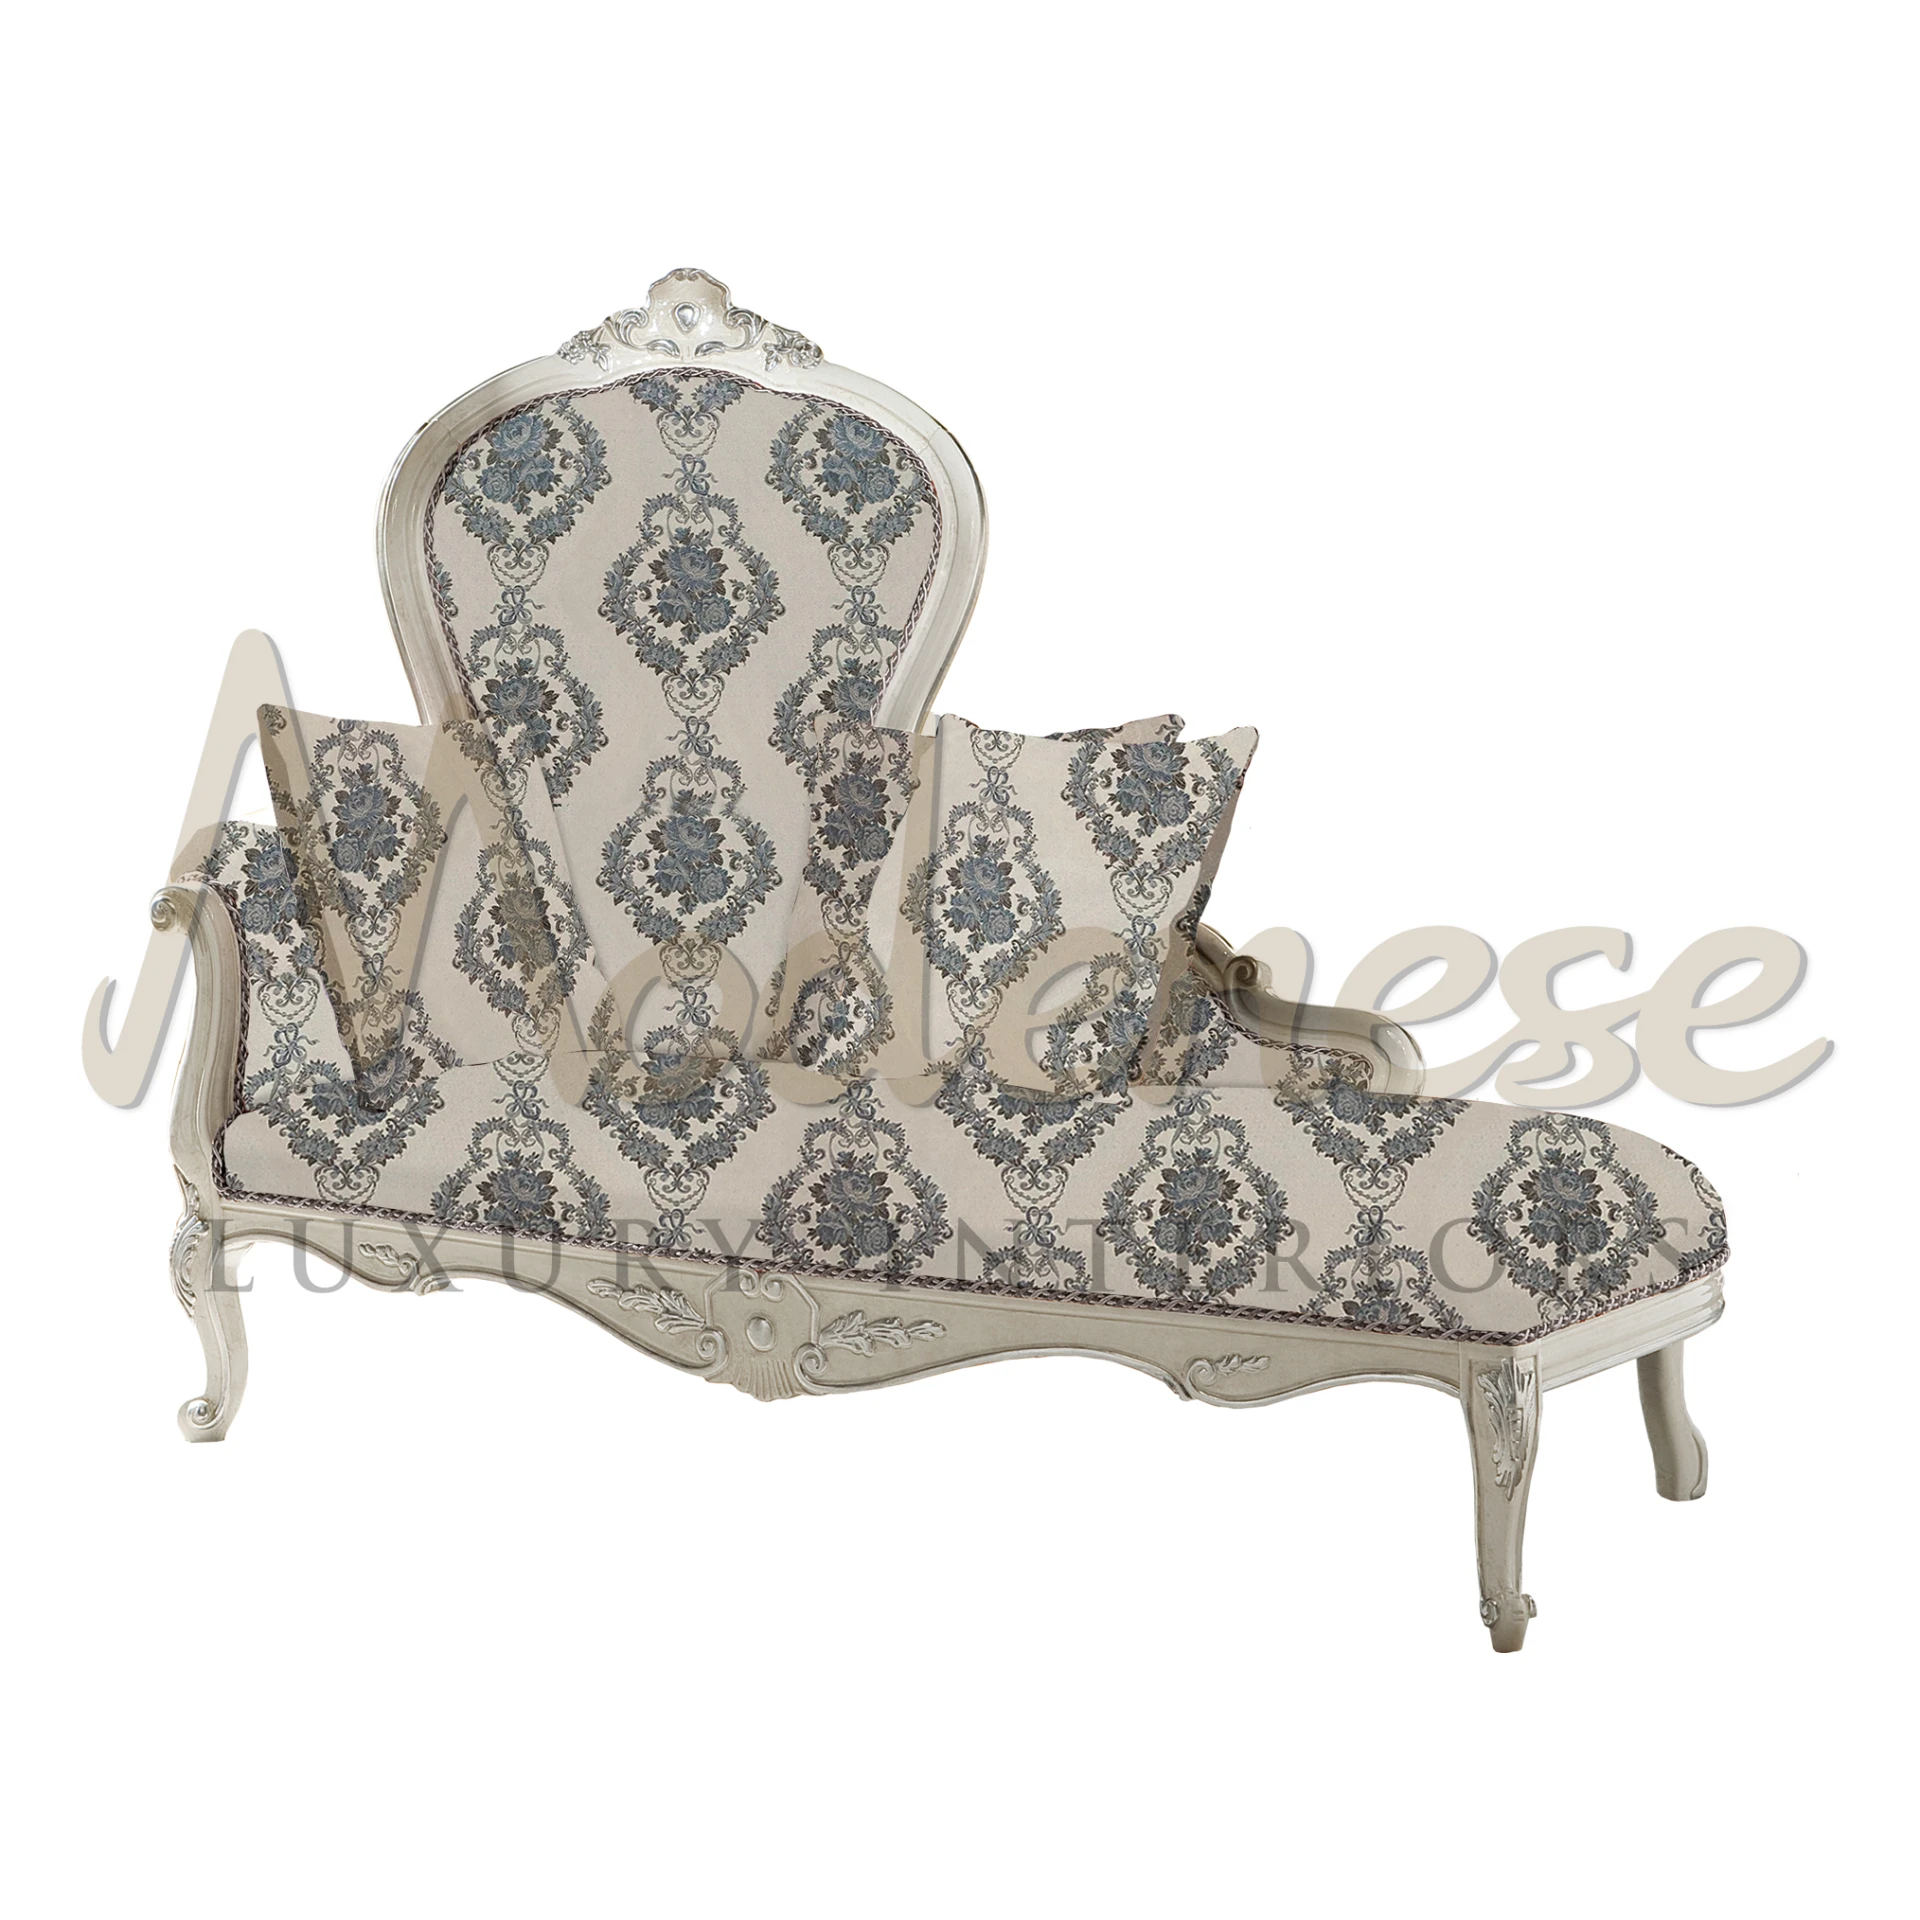 A vintage-style dormeuse with a high backrest and scrolled arms, featuring a cream and blue ornate pattern, detailed wood carvings, and elegant legs.